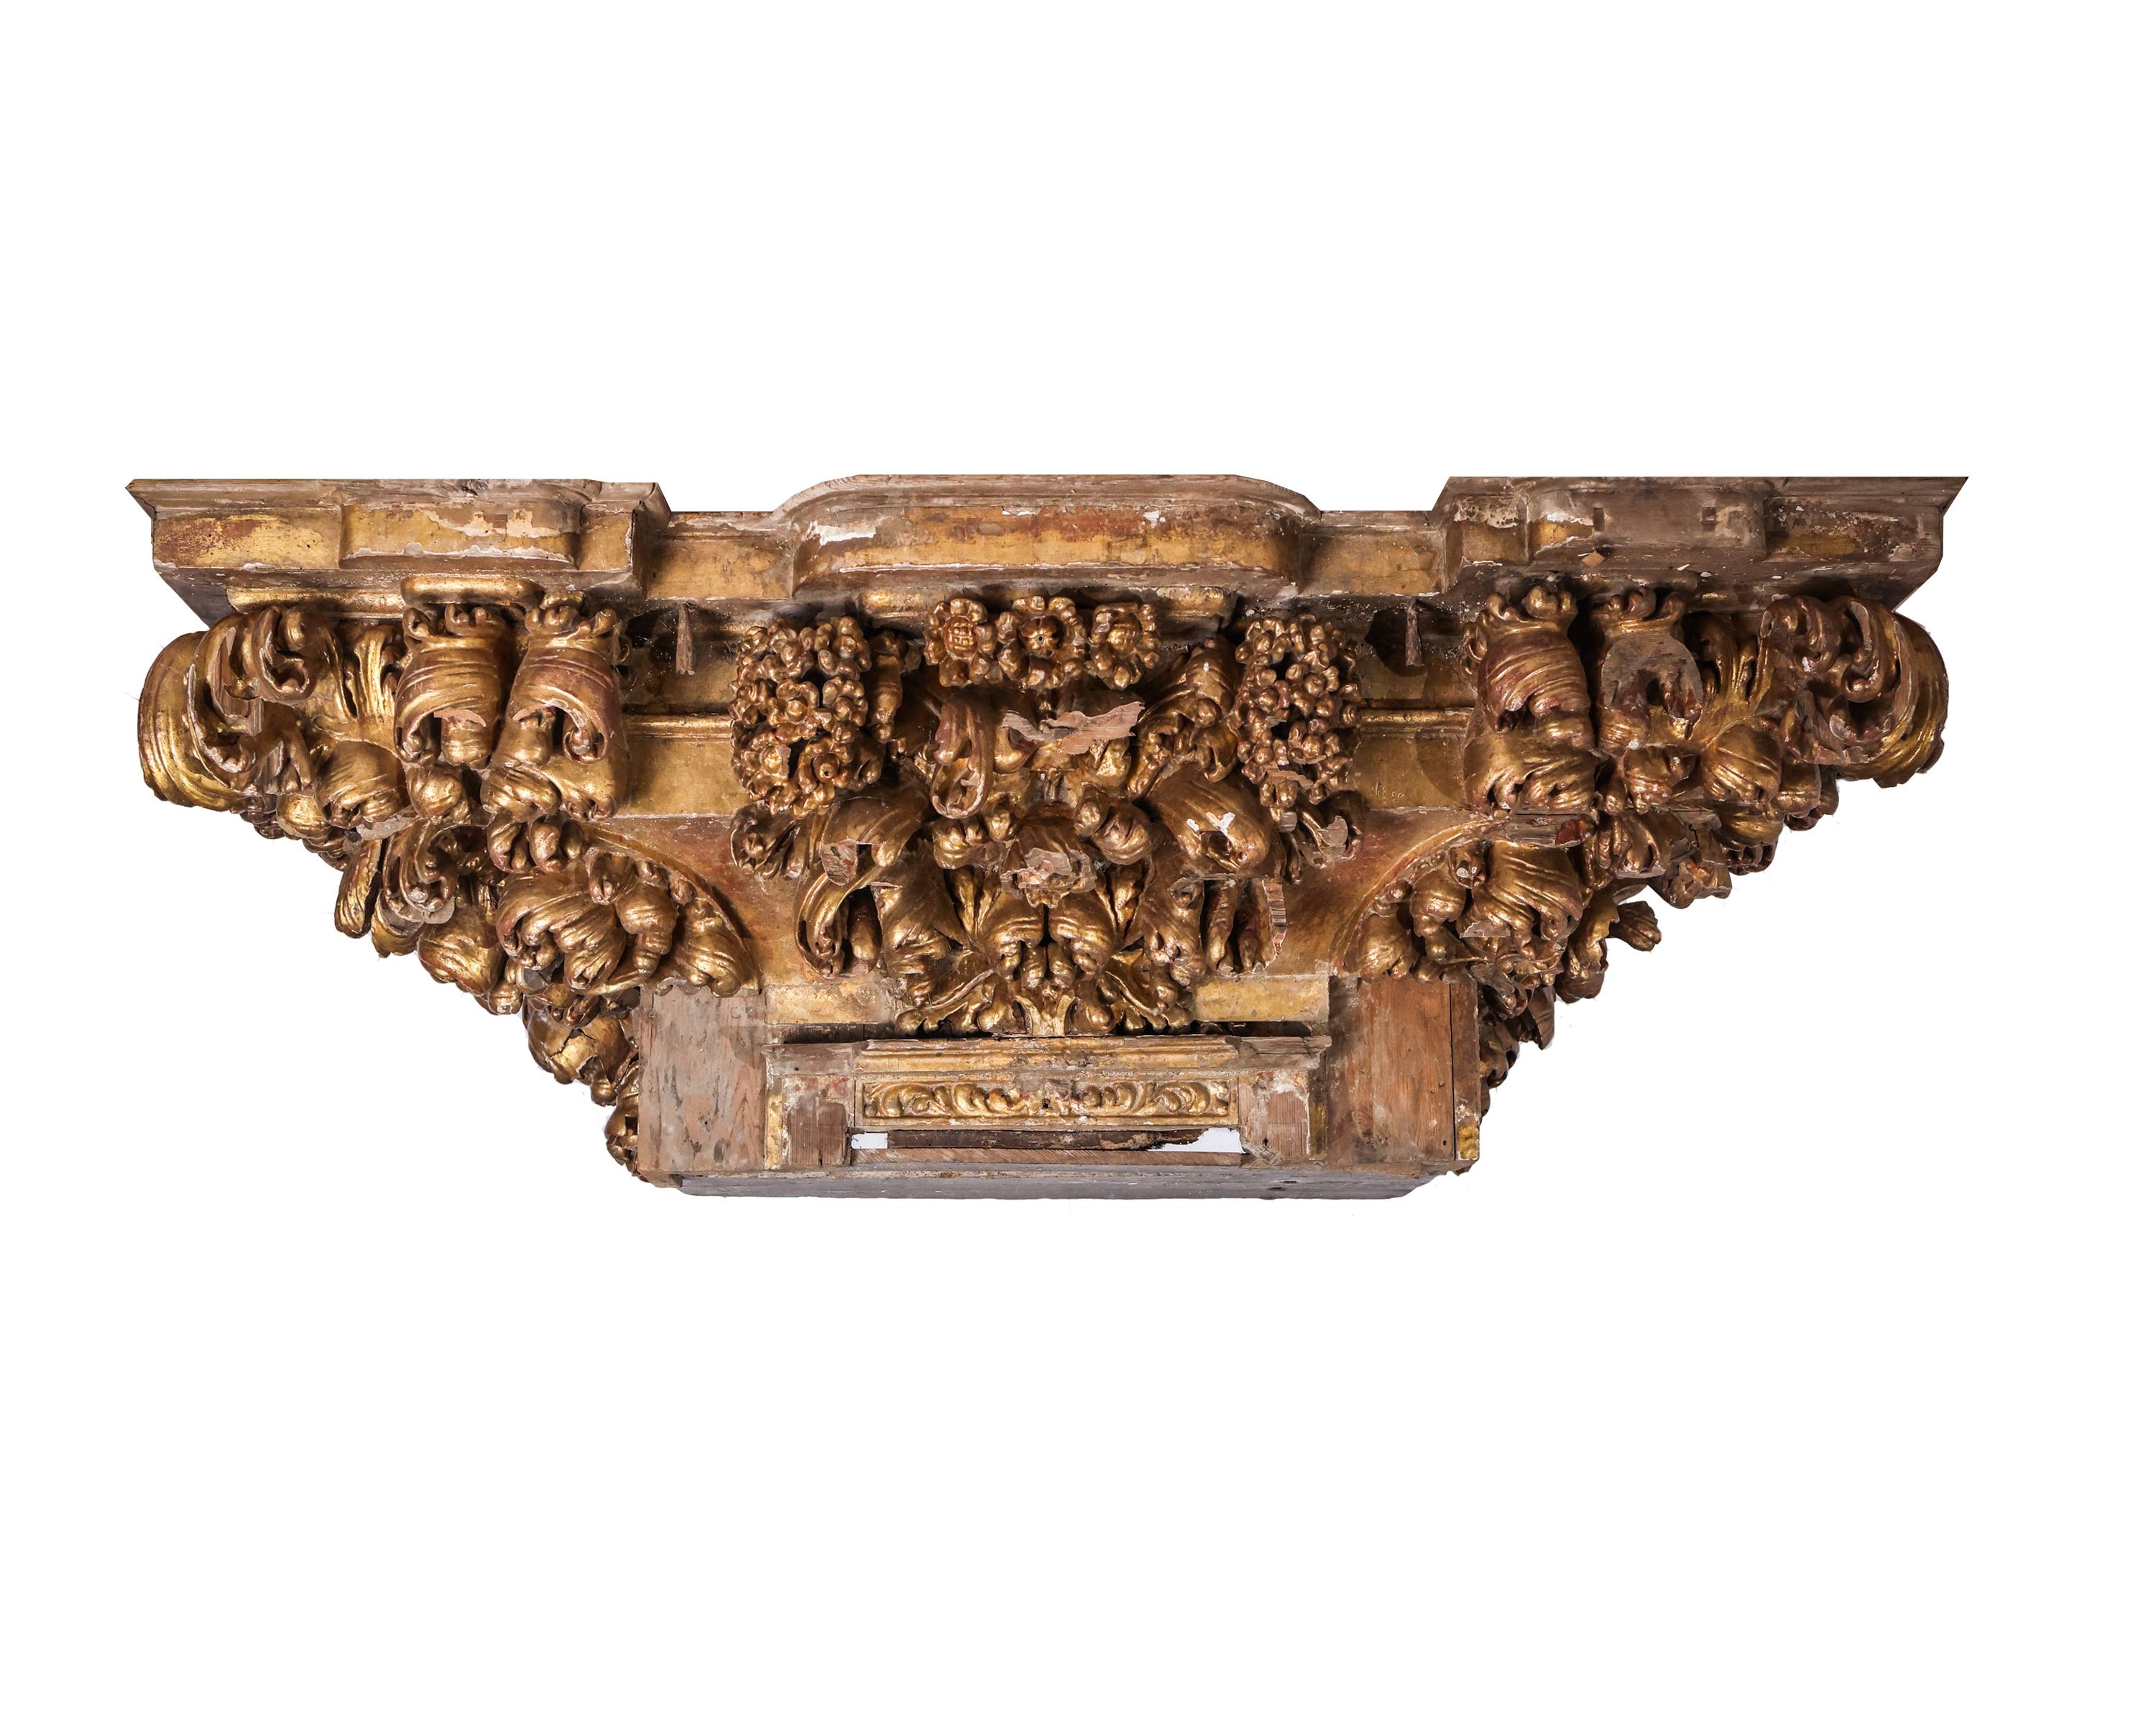 A truly phenomenal antique architectural gilt pediment salvaged from an interior structure in France, this massive structure is carved out of wood with incredibly ornate detail and its original gilded finish intact. The carvings of acanthus leaves